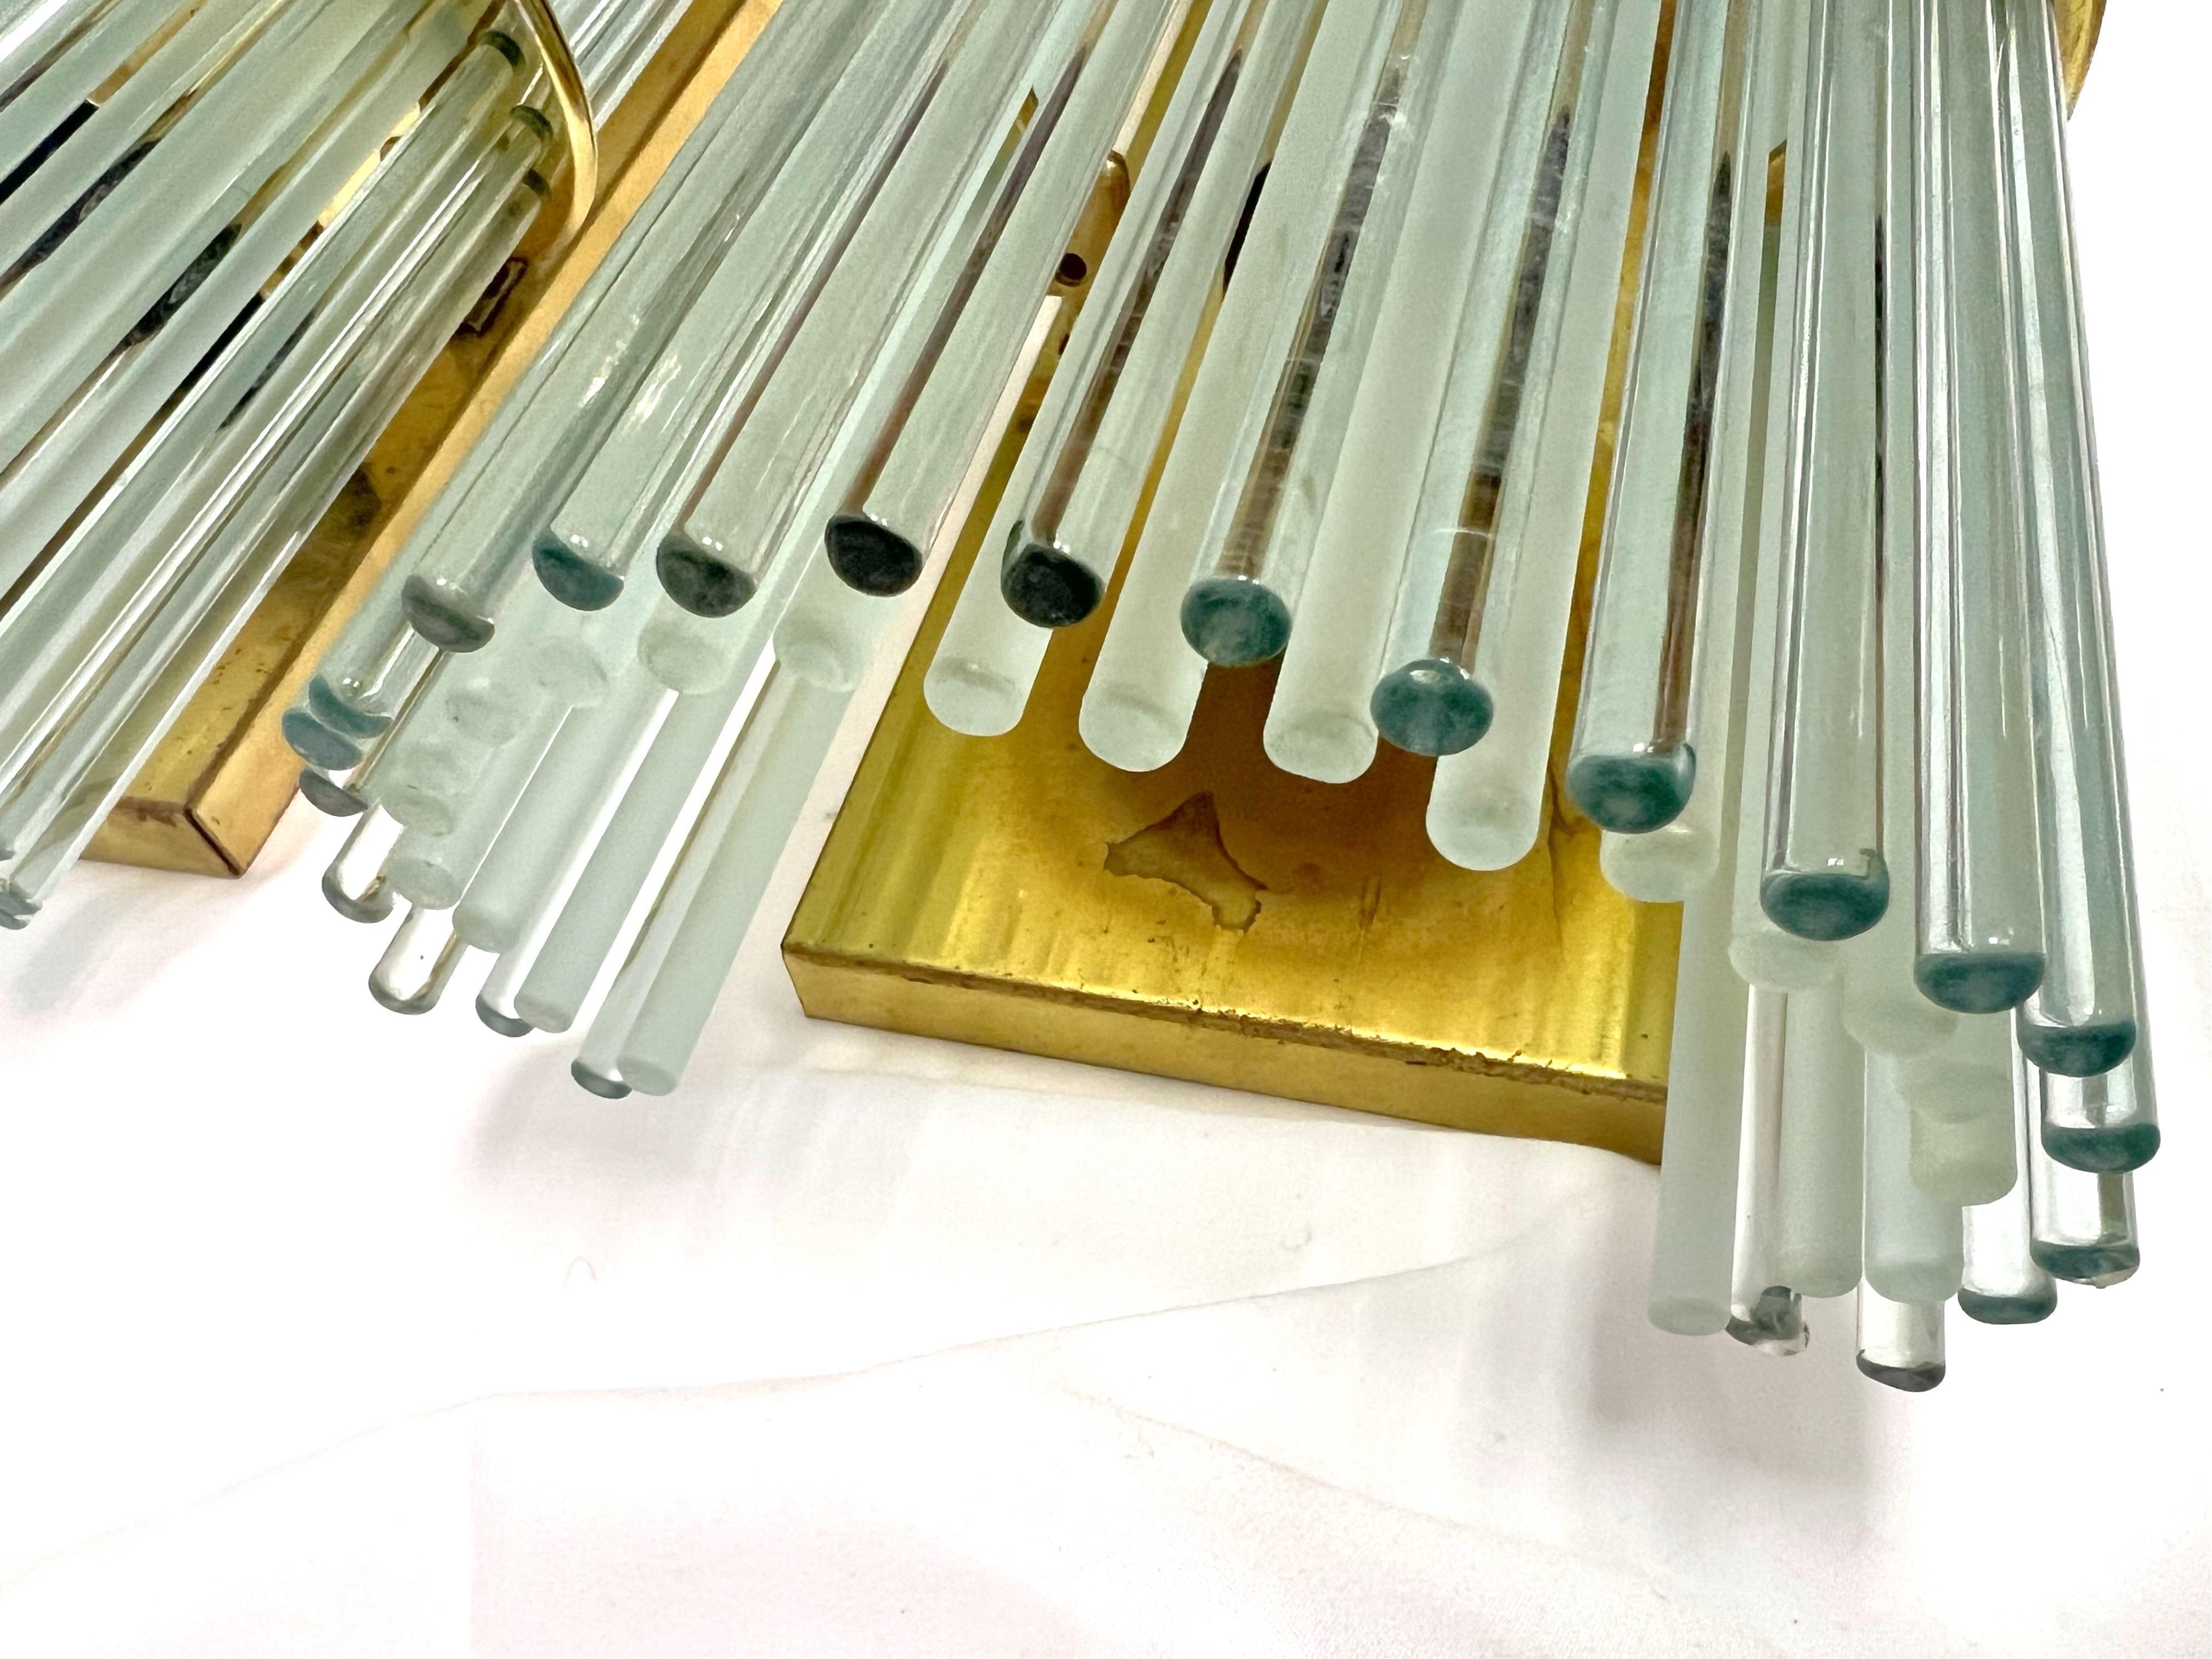 A very unique design utilizing thin glass rods as shades. An inner row of frosted rods helps obscure the bulbs, while the outer row of glossy rods add the sparkle. The fixtures have some patina on the brass, and still display very well. There are